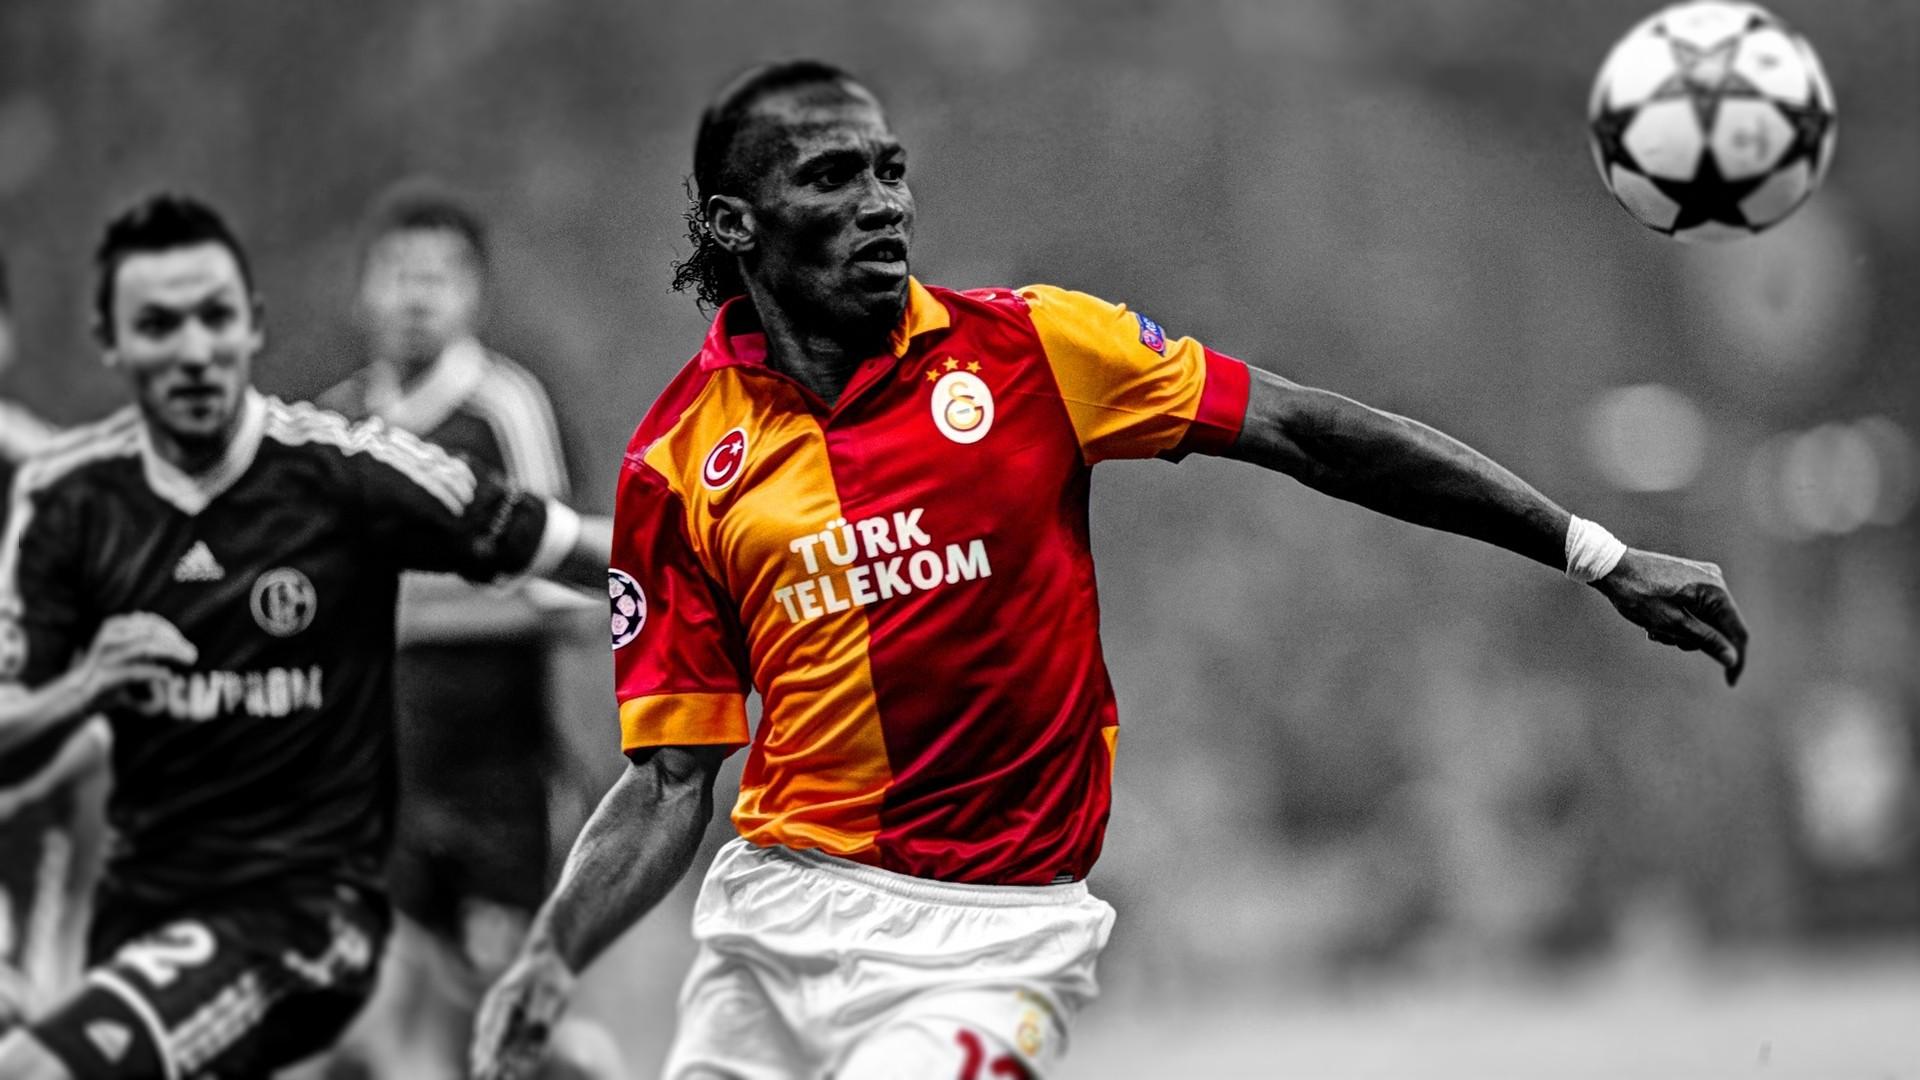 The forward of Galatasaray Didier Drogba wallpaper and image